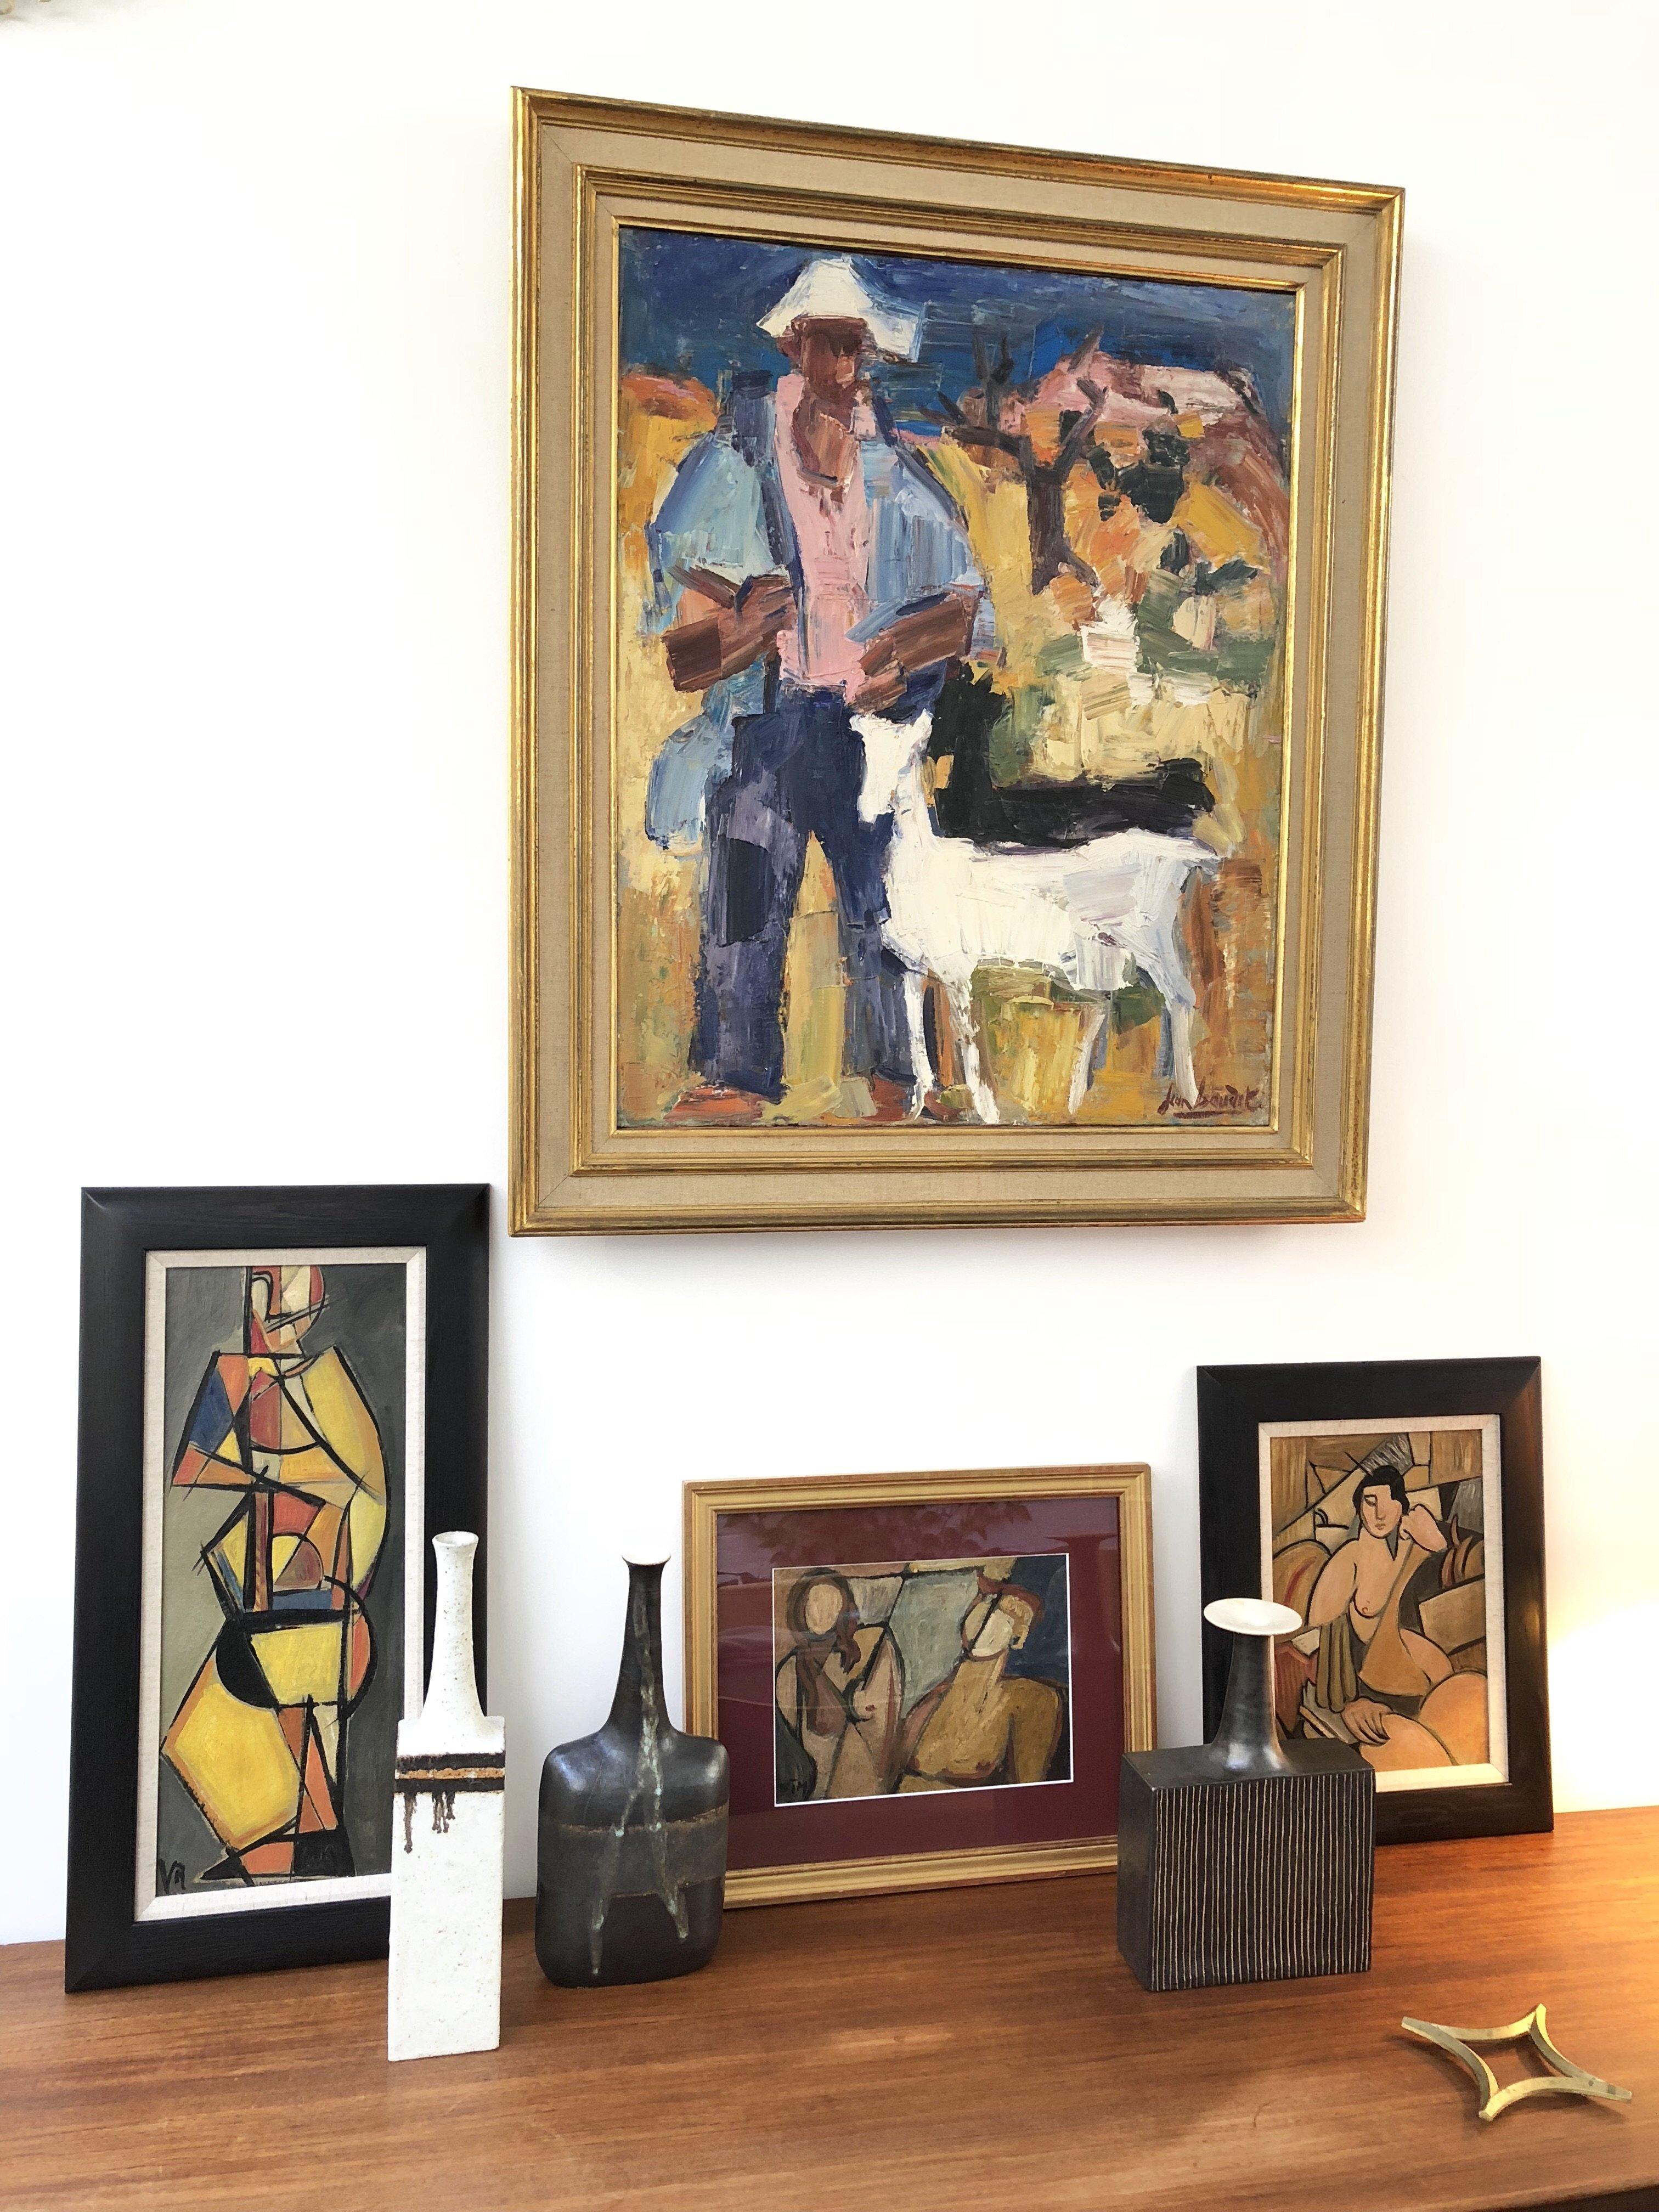 'Portrait of Man and Woman' by STM, Mid-Century Modern Cubist Nude Oil Painting 2